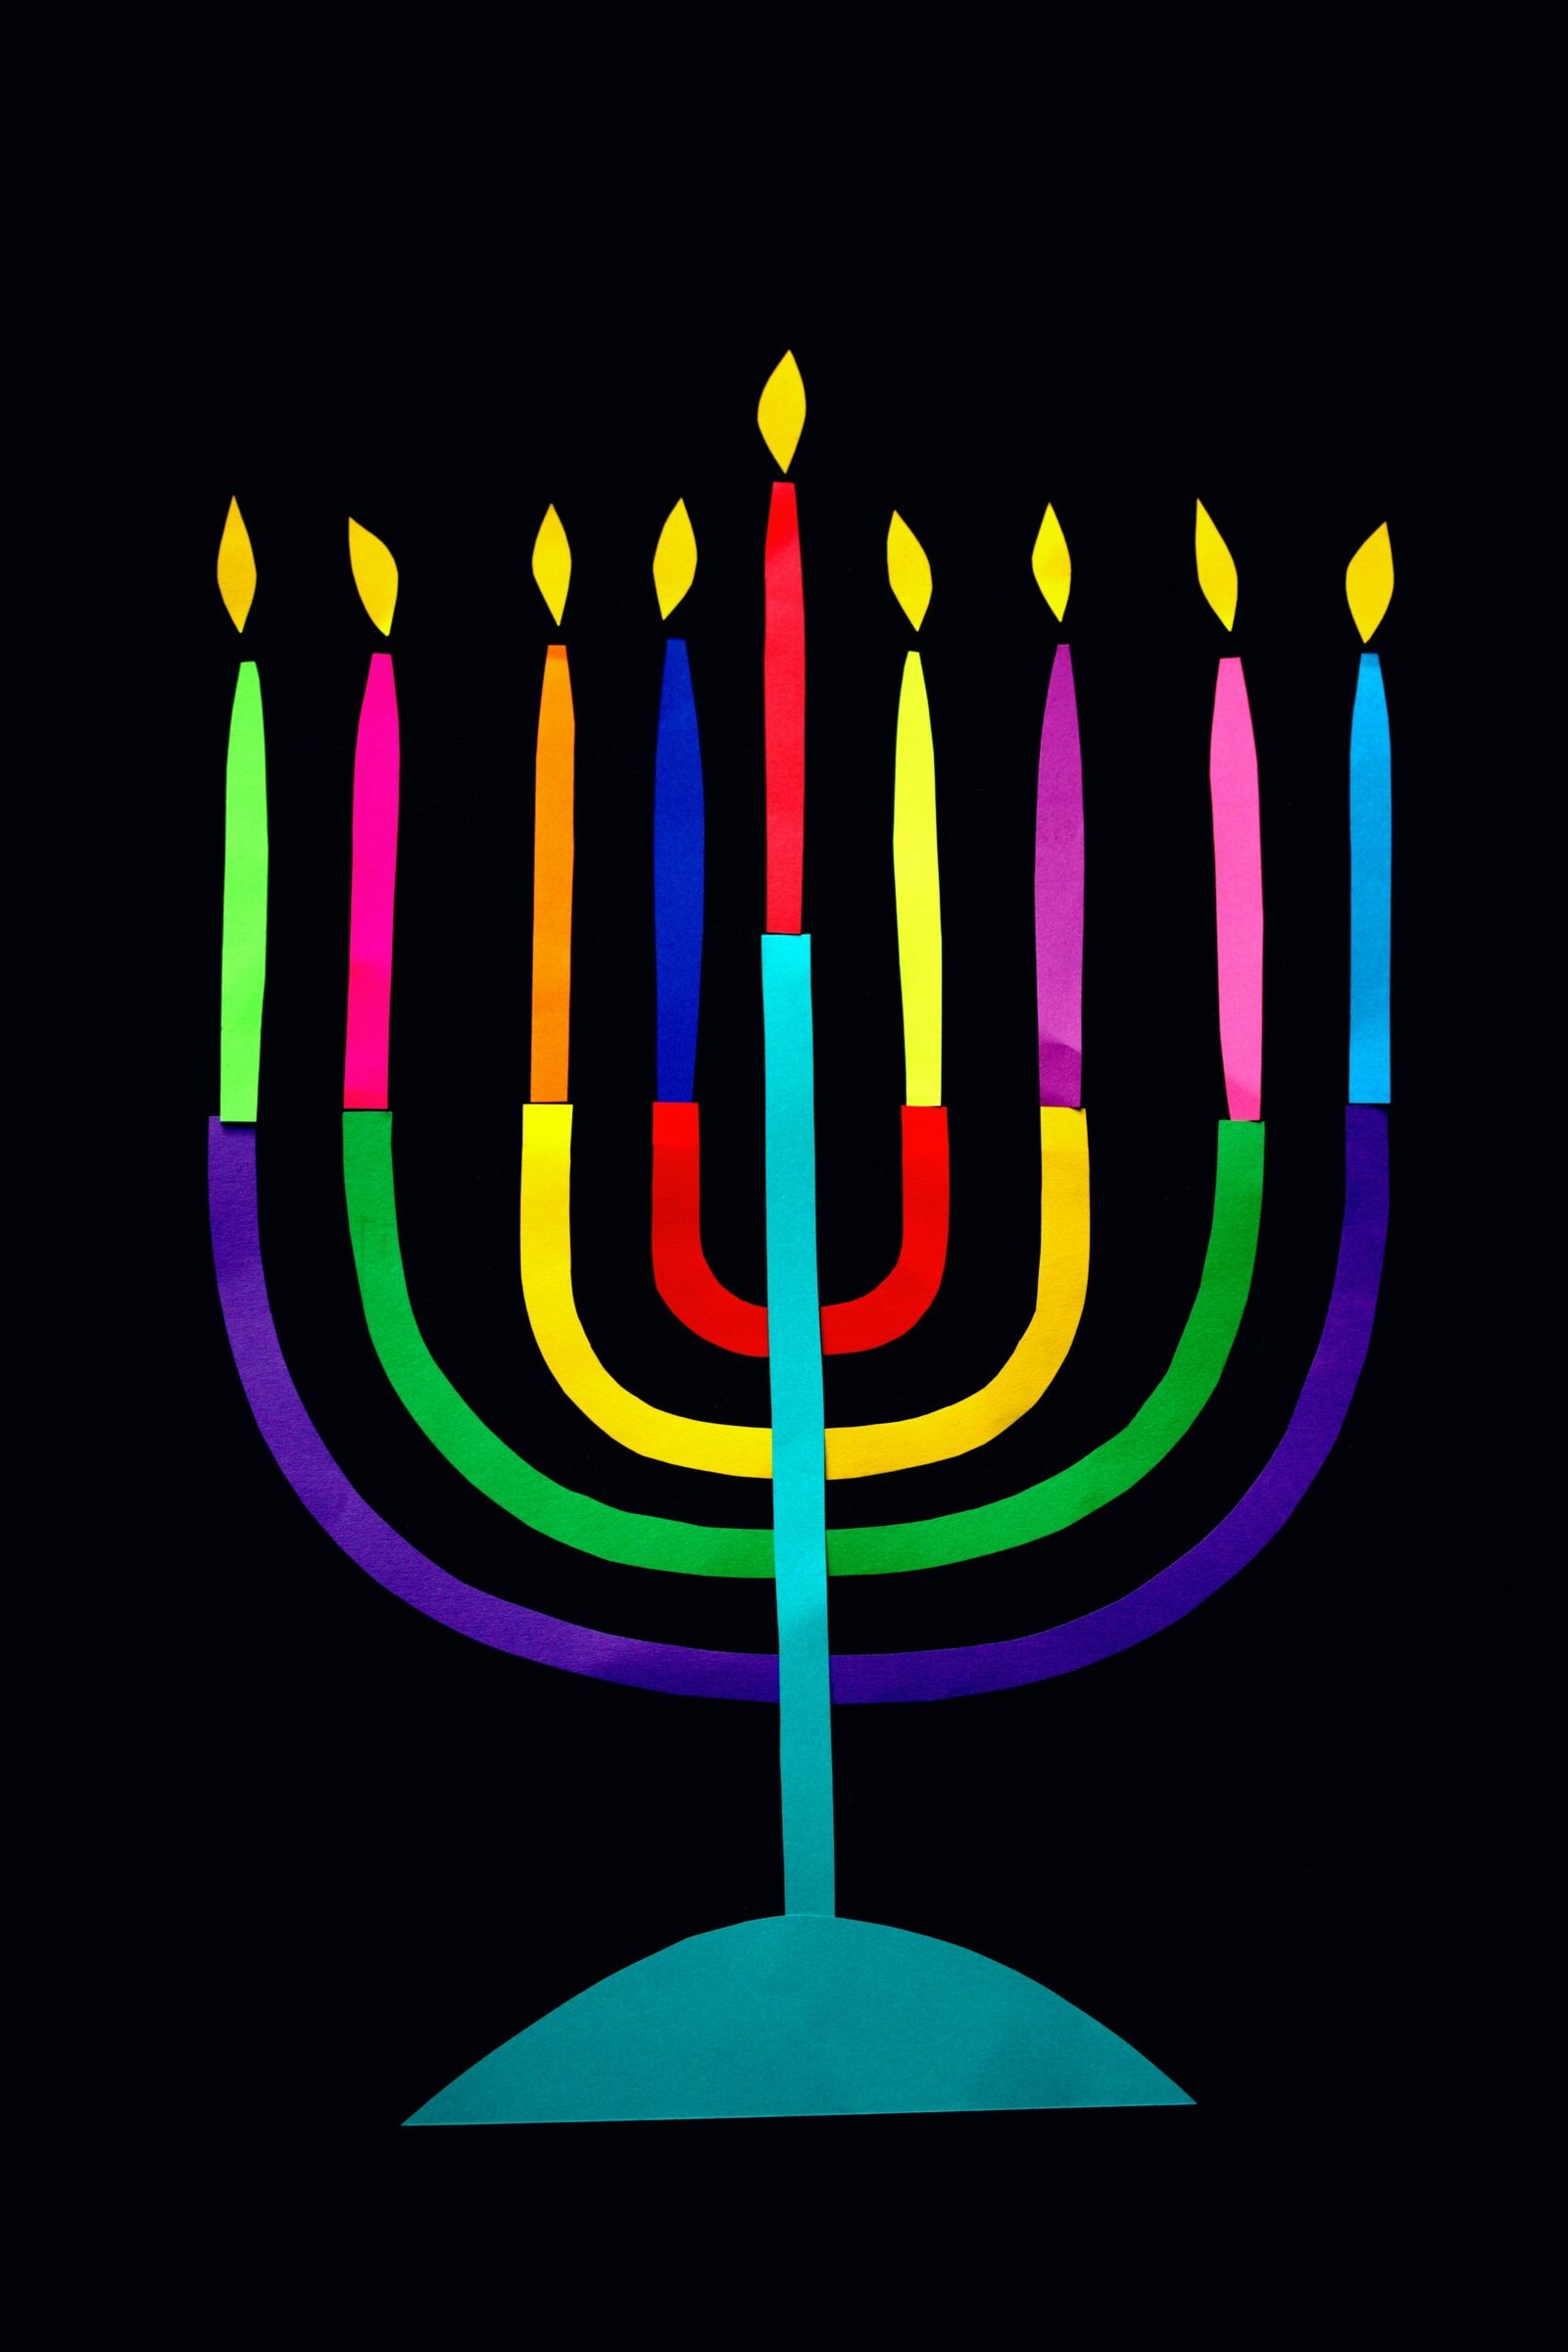 Hanukkah Celebration Ideas: Traditions and Activities for a Memorable Holiday Season